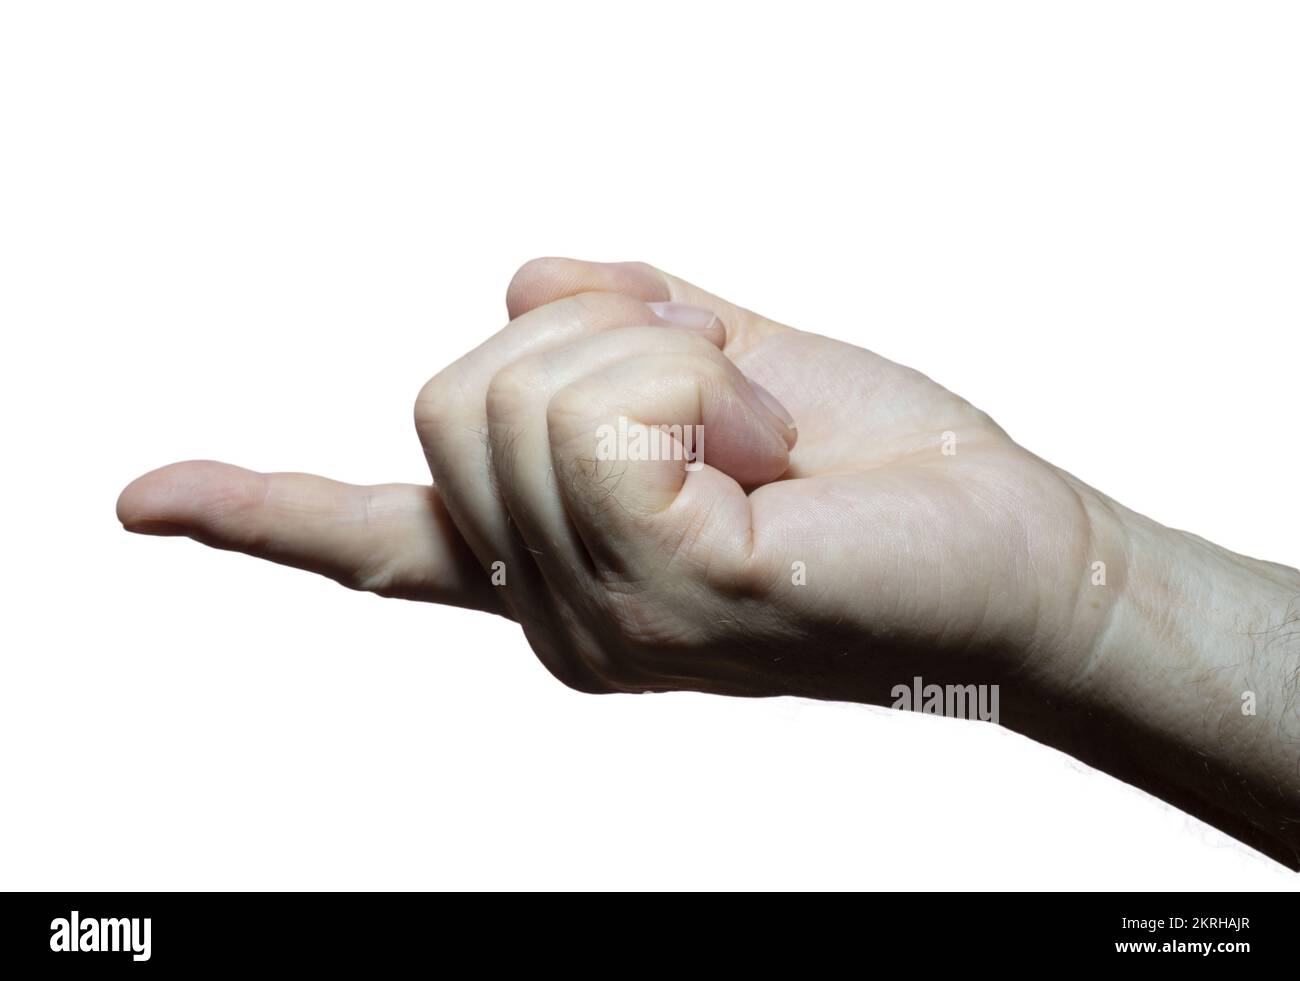 the finger of a man's hand with a transparent background Stock Photo